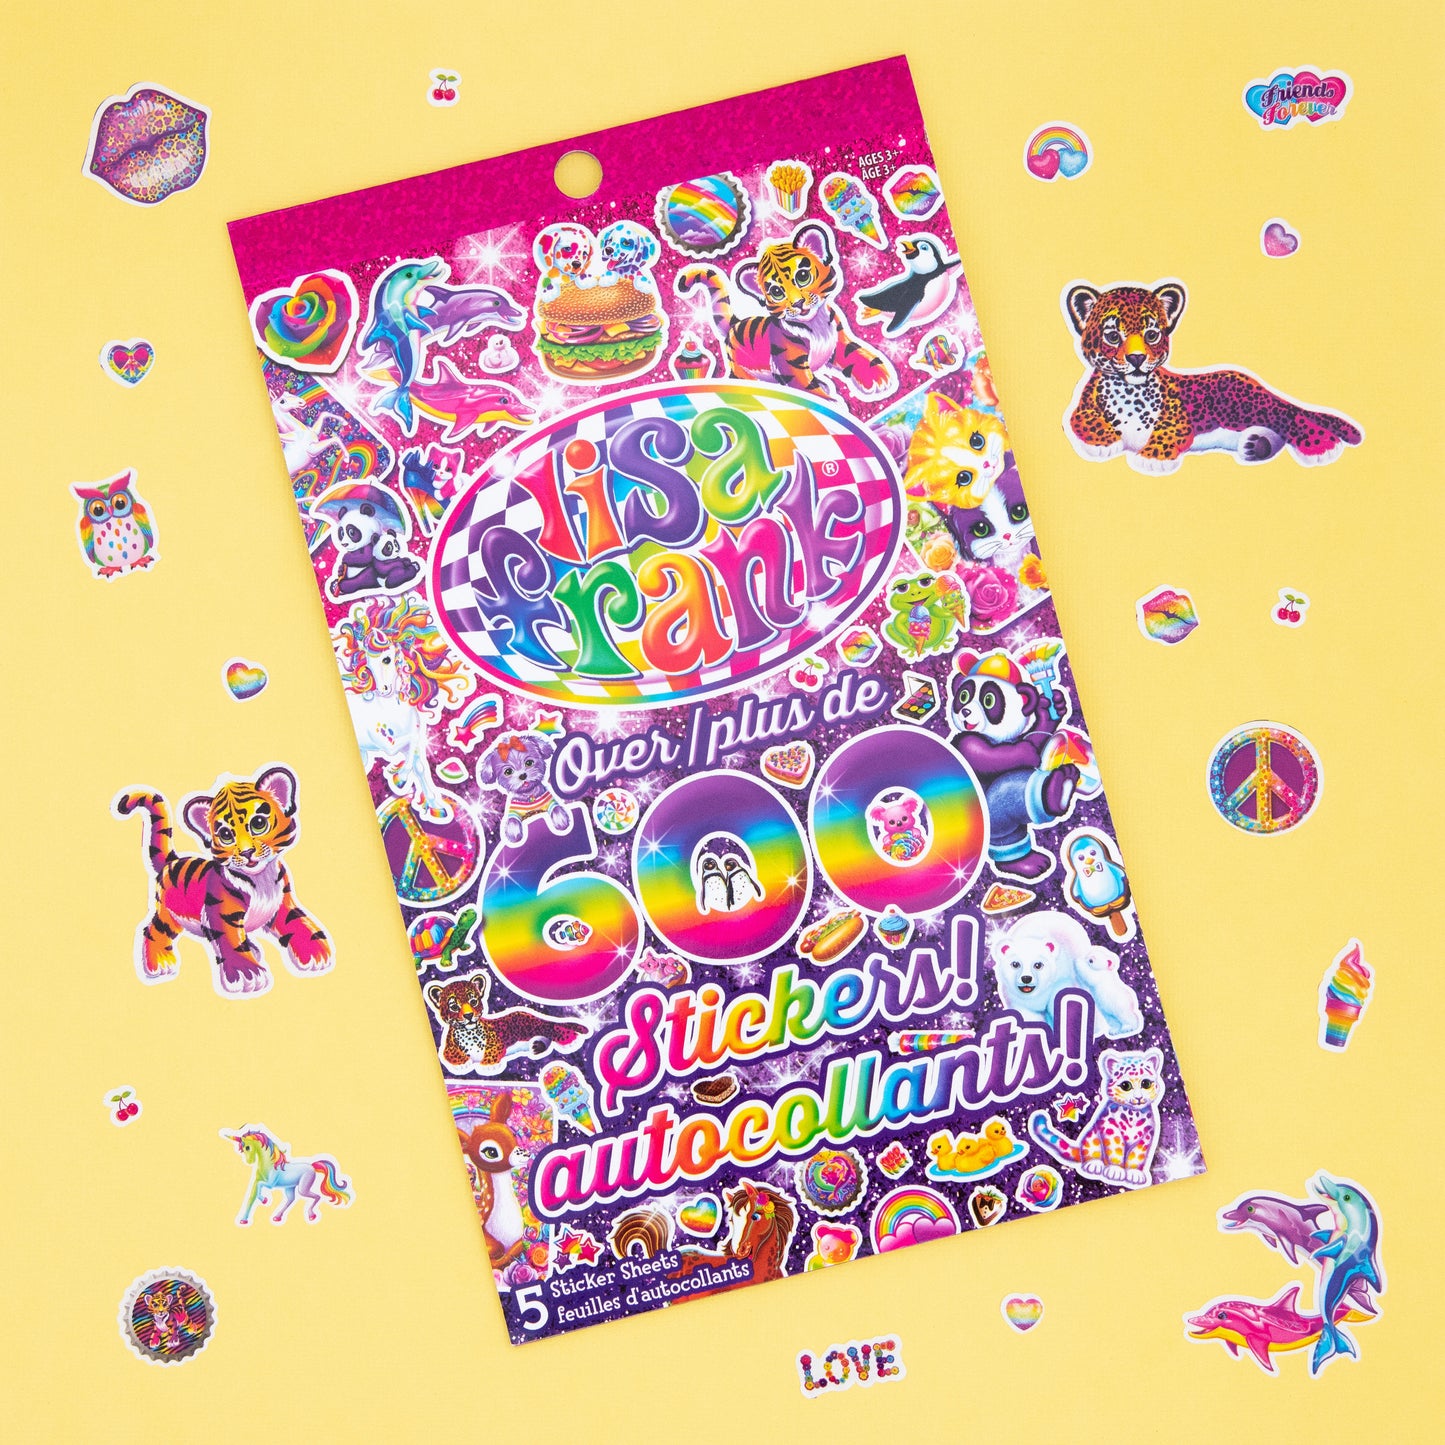 A collection of Lisa Frank stickers featuring colorful and playful designs of animals, rainbows, hearts, and other fun shapes. These stickers are perfect for adding a pop of color and personality to your notebooks, planners, and crafts.